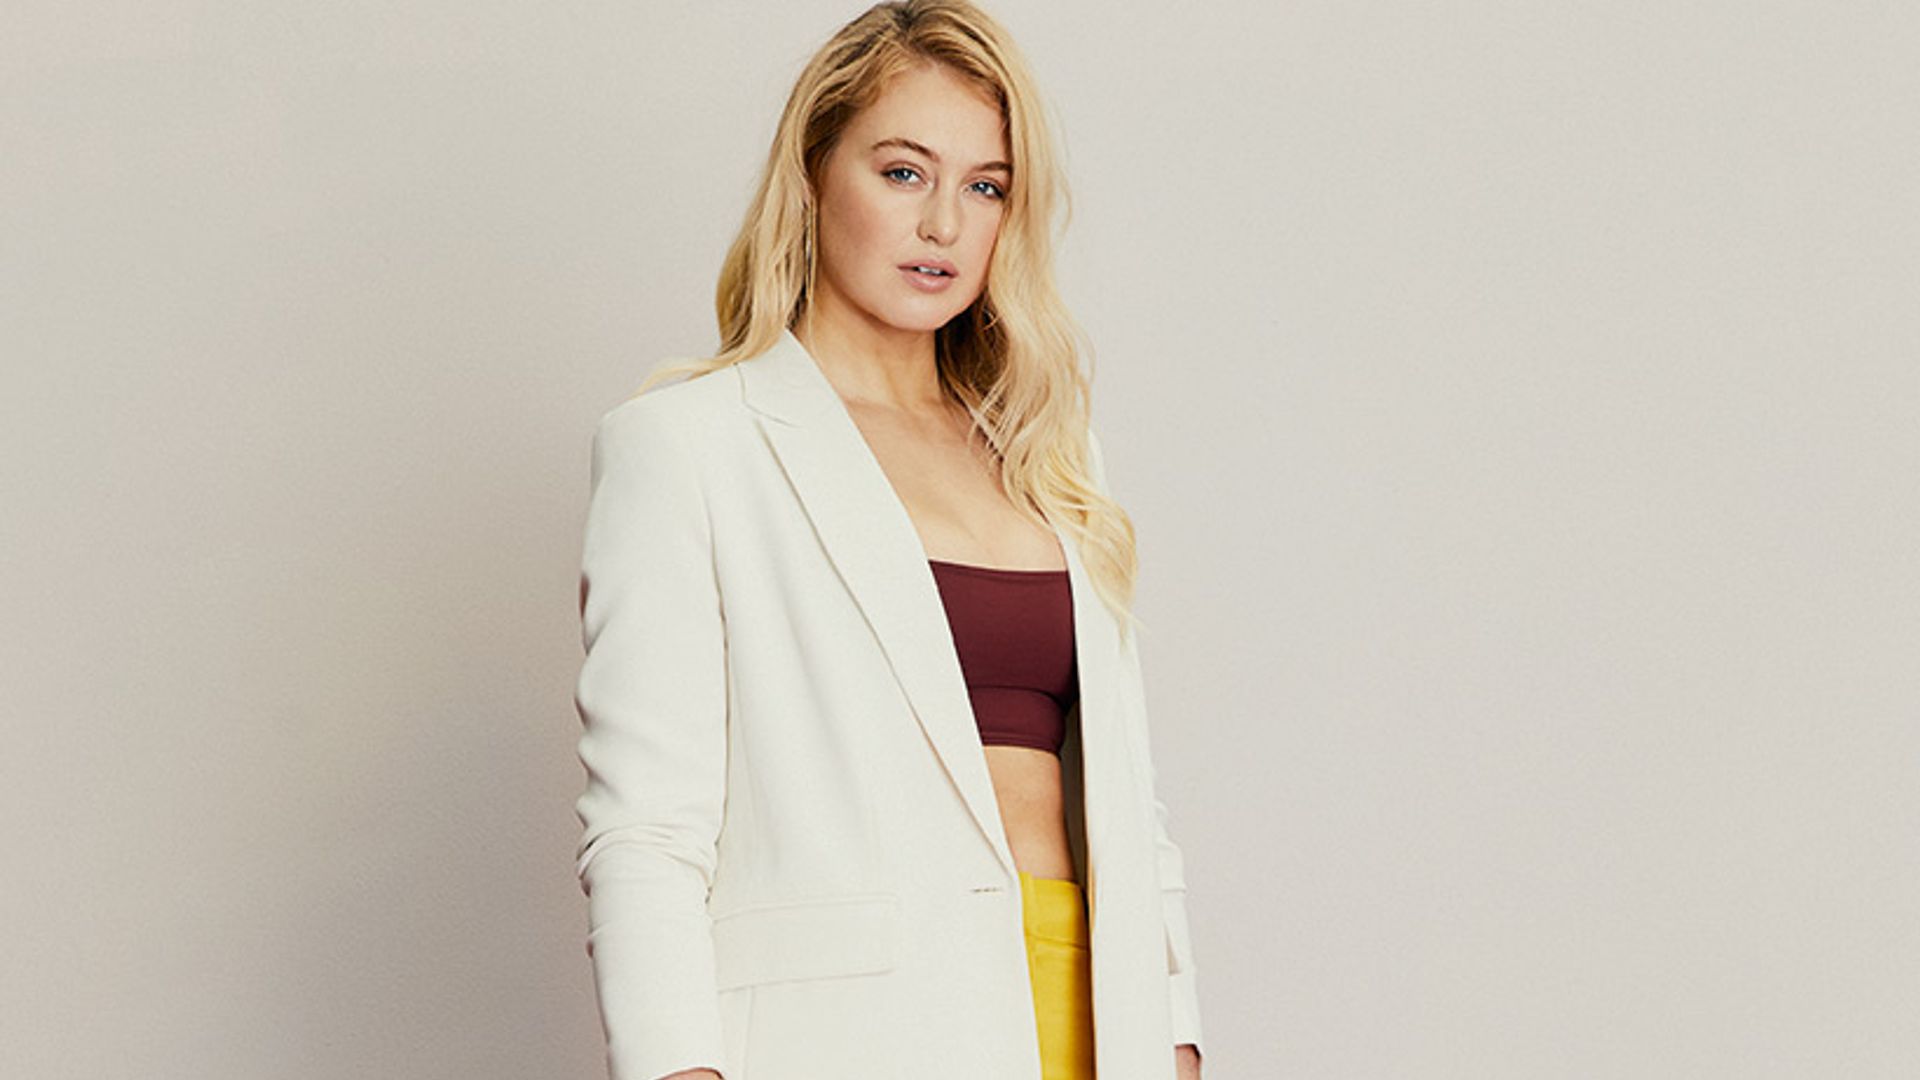 Meet Iskra Lawrence your new HELLO! Fashion Monthly cover star...